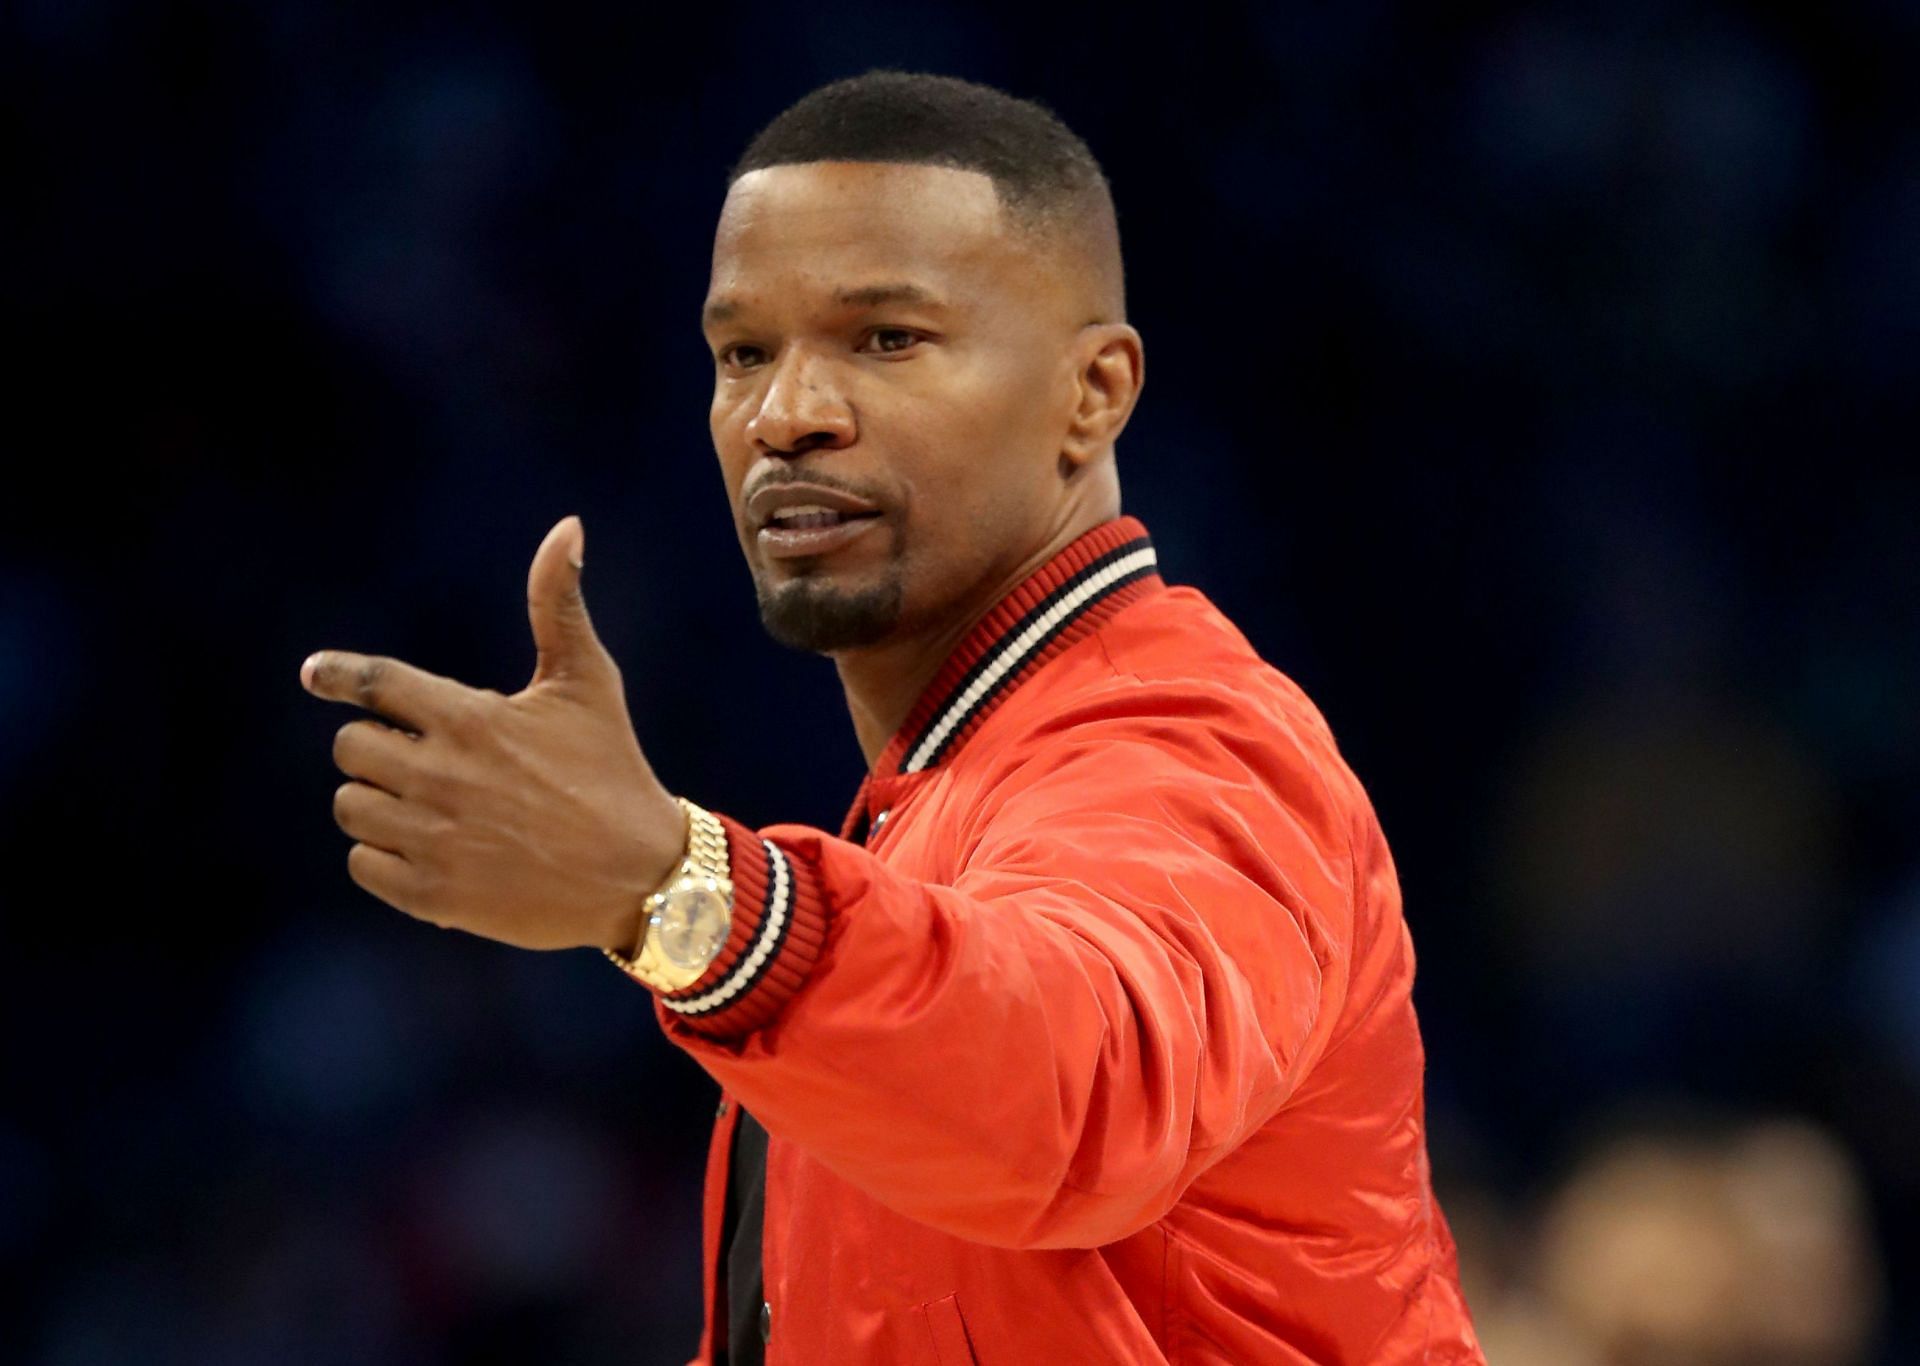 Jamie Foxx at the 2019 NBA All-Star Game